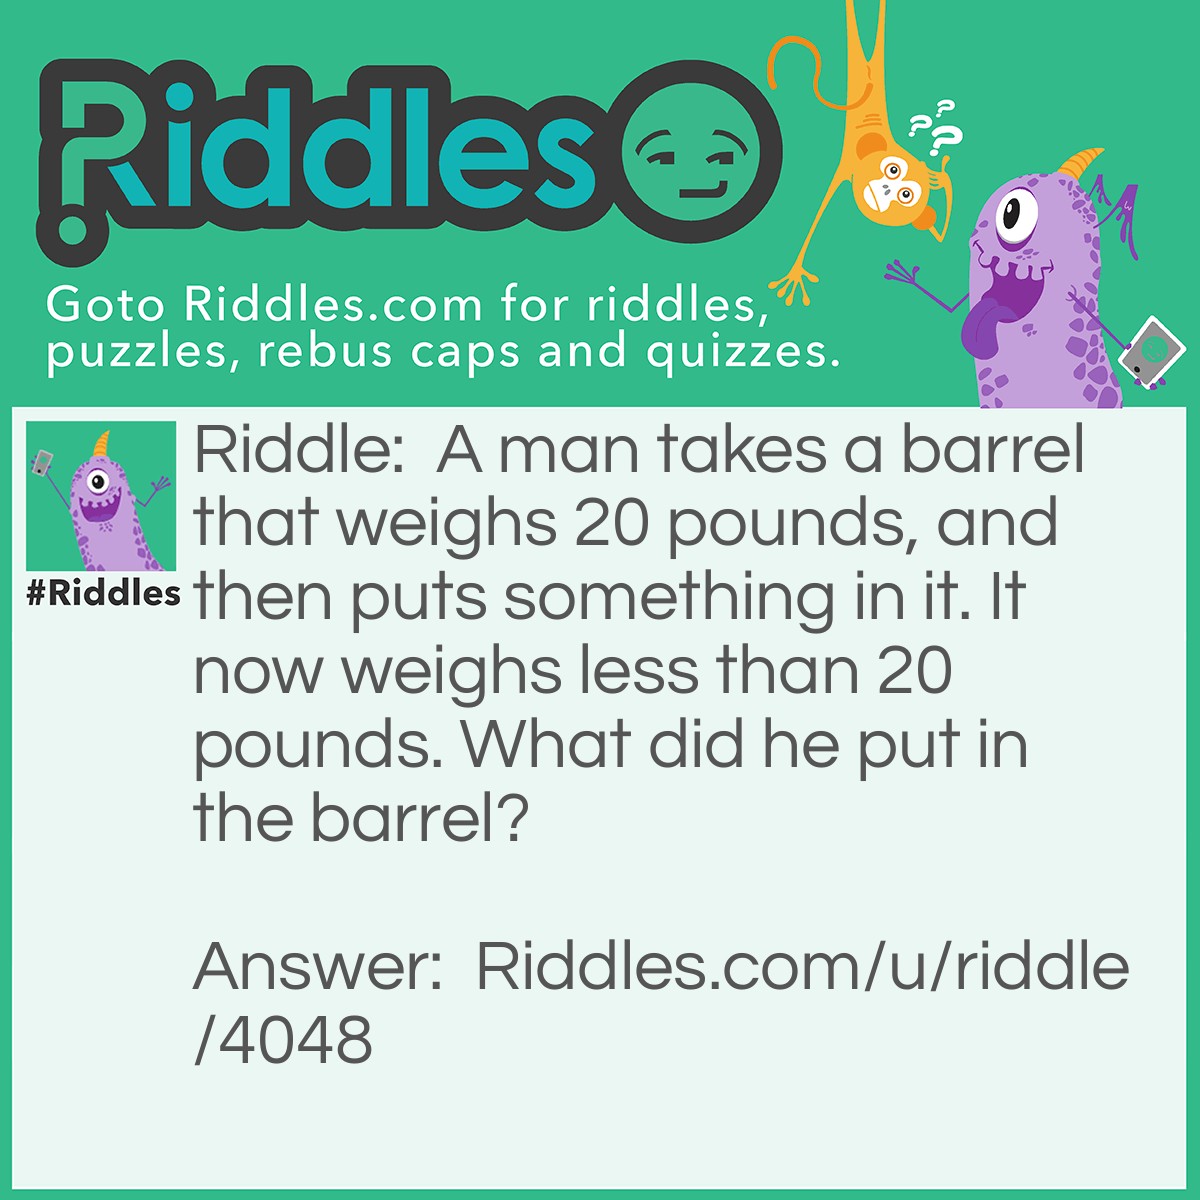 Riddle: A man takes a barrel that weighs 20 pounds, and then puts something in it. It now weighs less than 20 pounds. What did he put in the barrel? Answer: He put a hole in the barrel to make it weigh less.